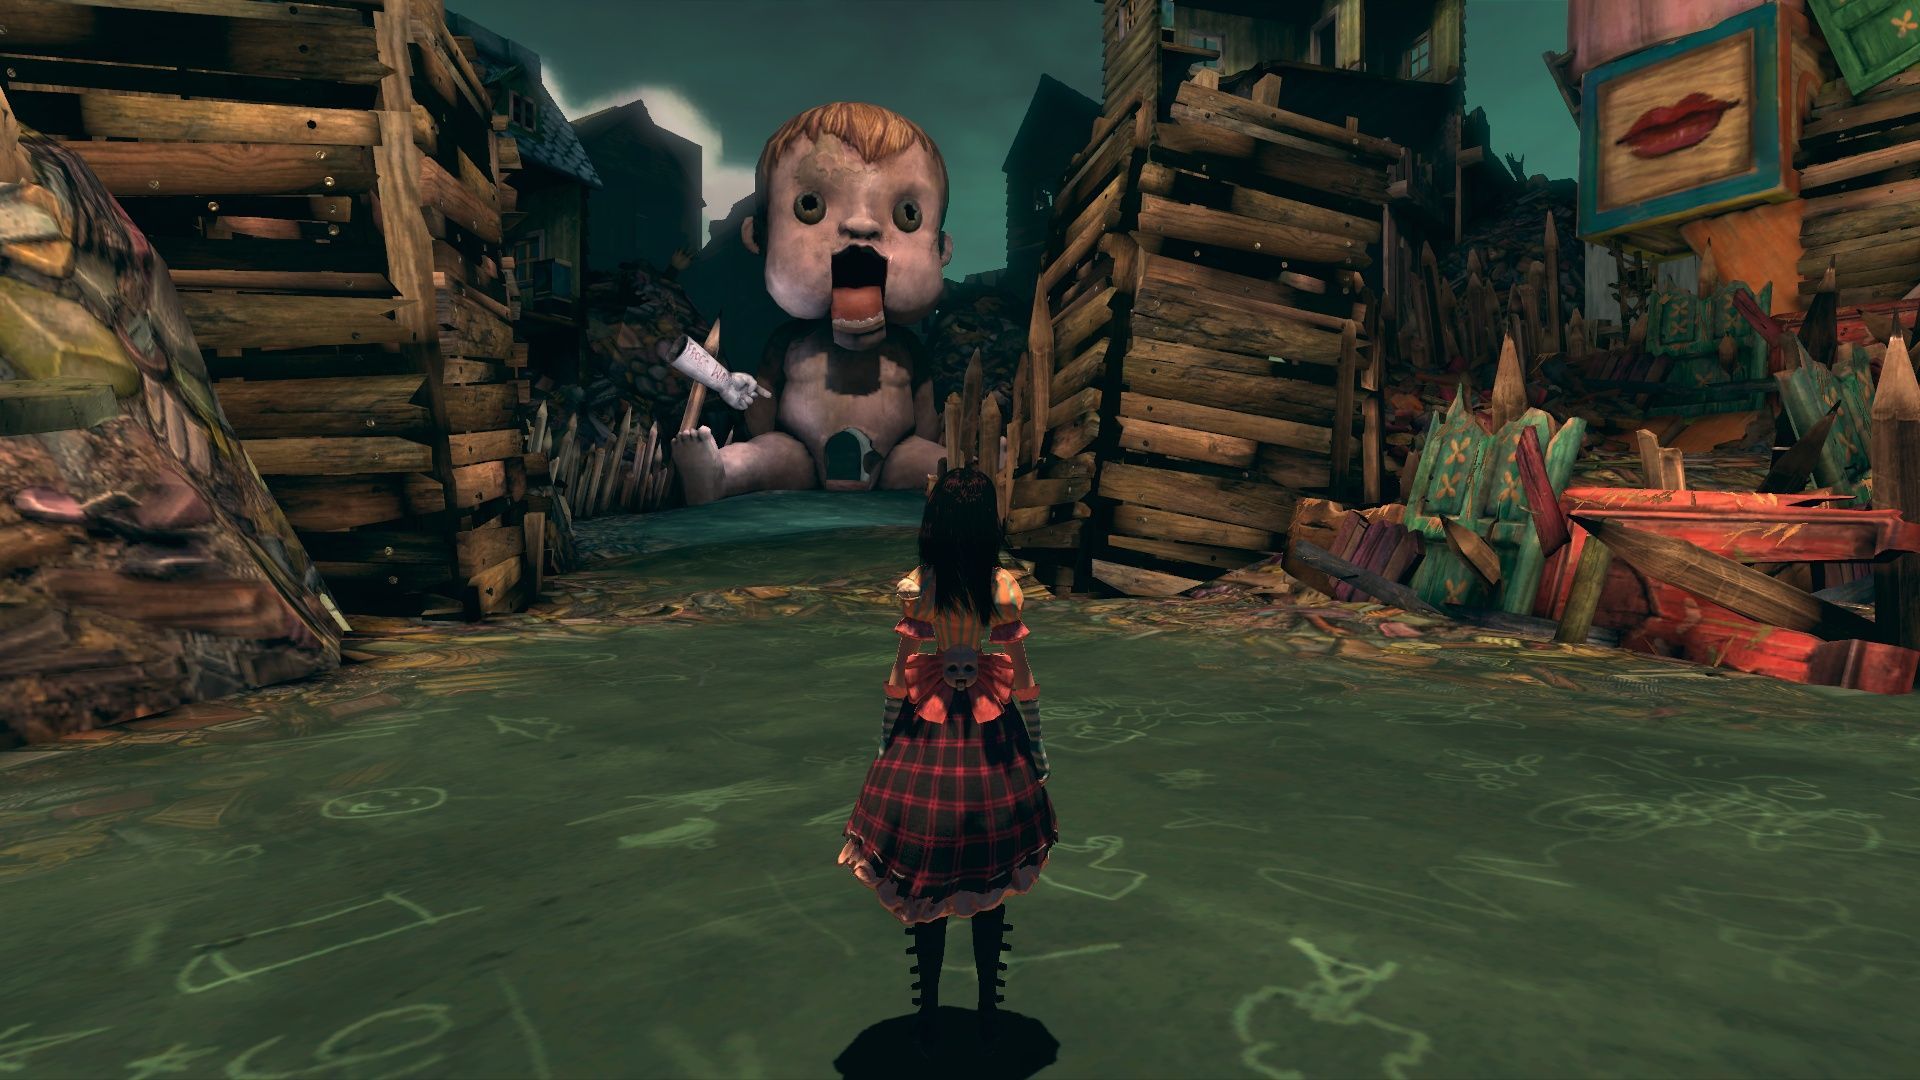 Screenshot for the game Alice: Madness Returns (2011) RS | Repack by R.G. The mechanics